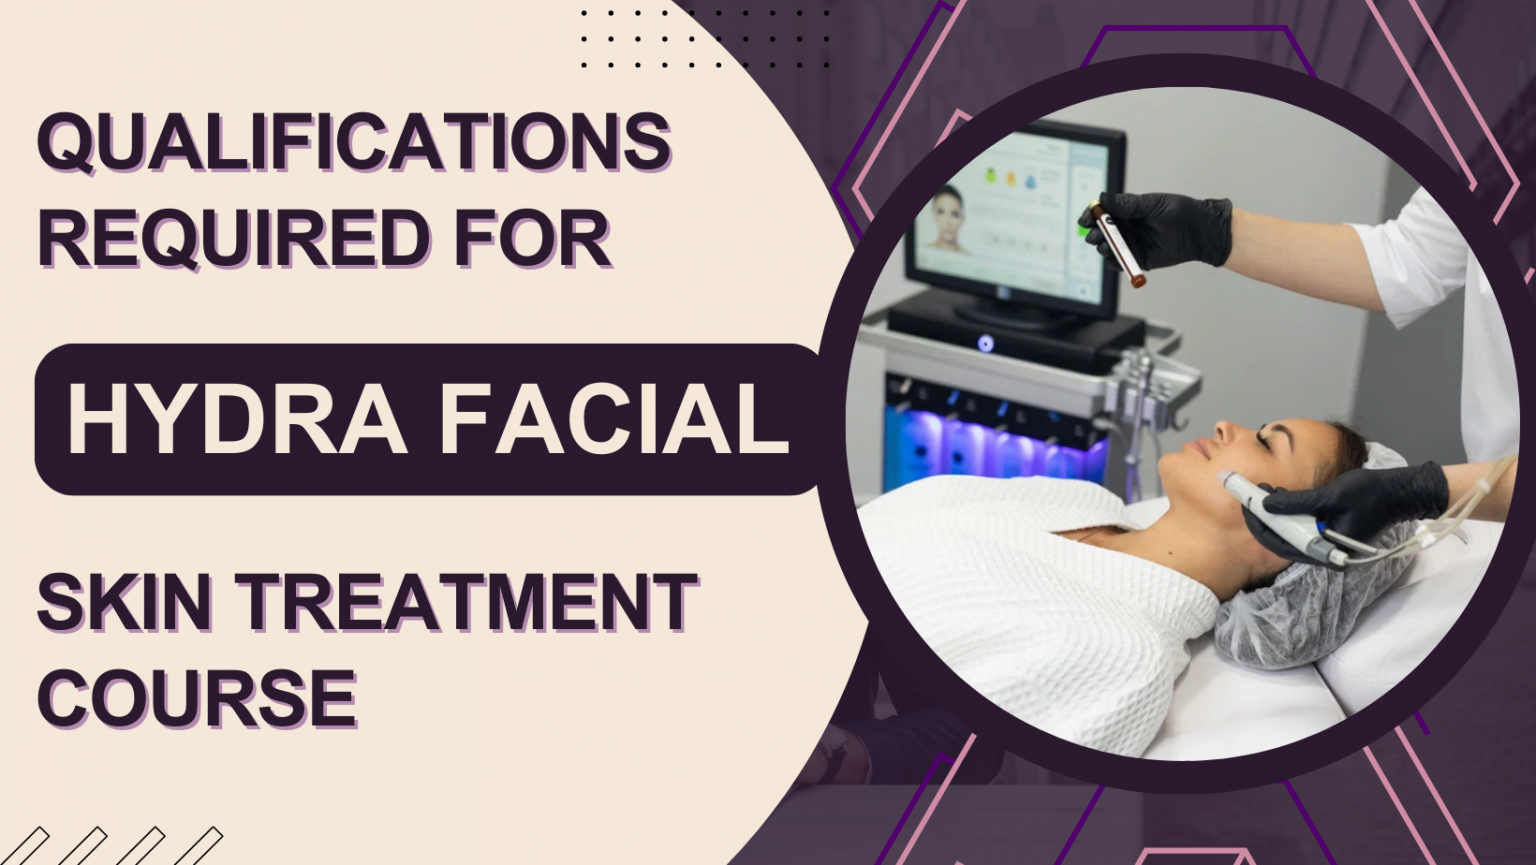 QUALIFICATIONS-REQUIRED-FOR-HYDRAFACIAL-SKIN-TREATMENT-COURSES